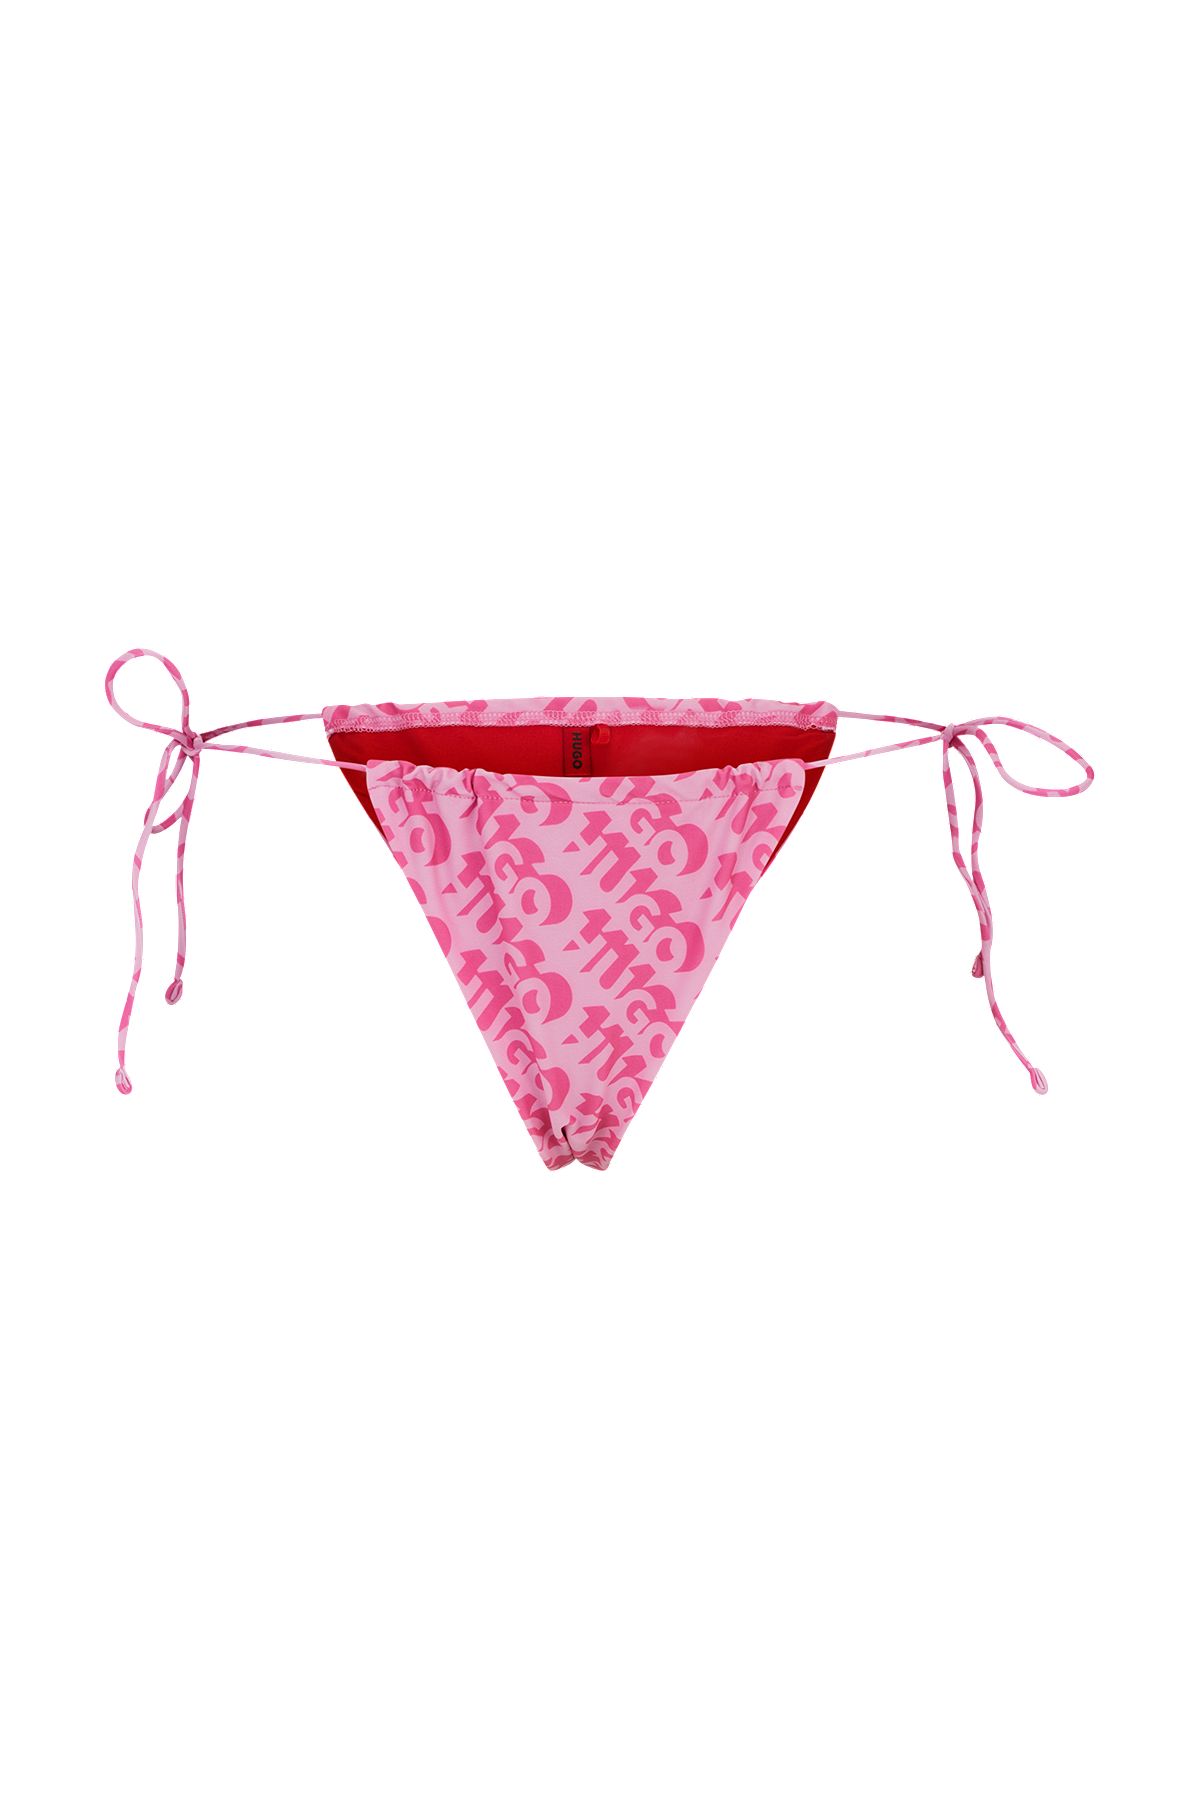 Tie-side bikini bottoms with repeat logo print, Pink Patterned